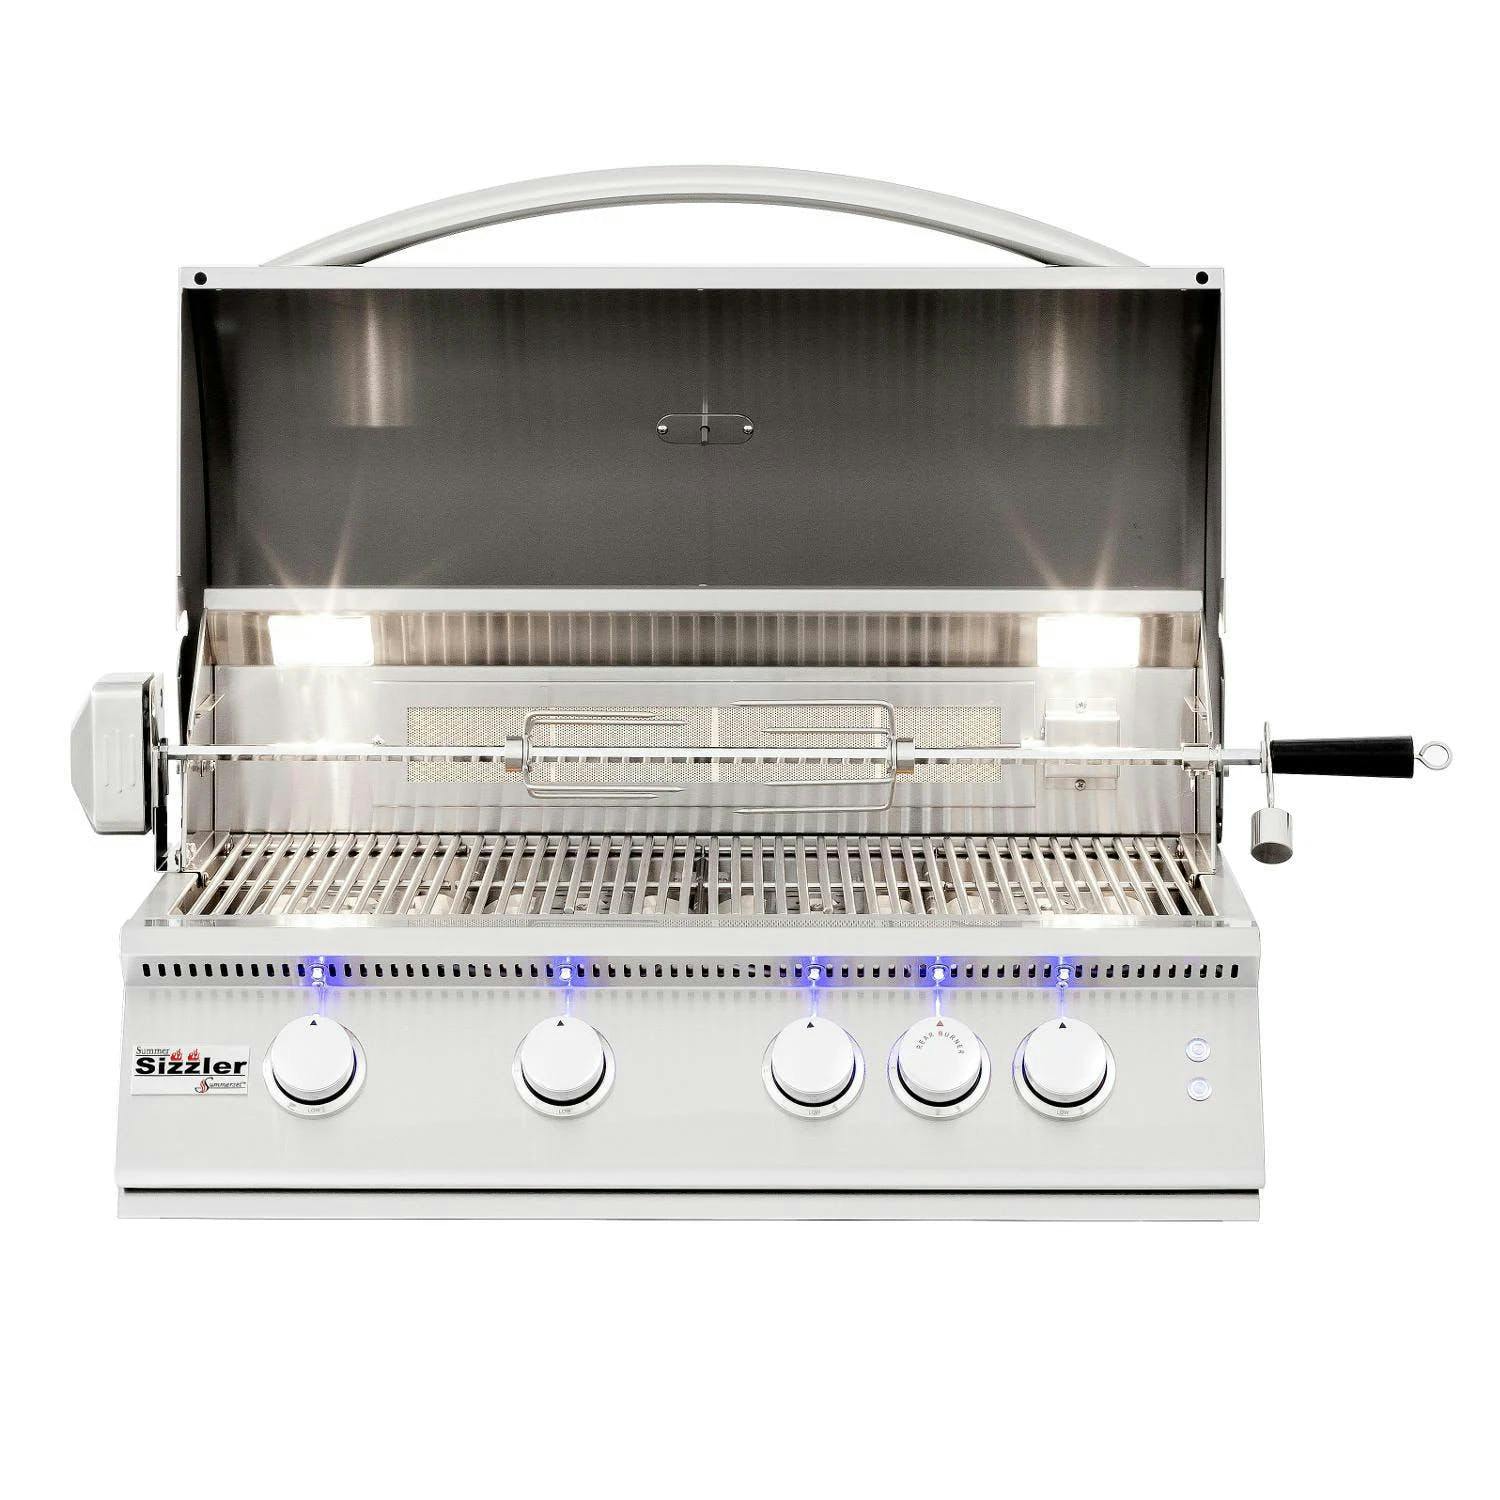 Summerset Sizzler Pro Built-in Gas Grill with Rear Infrared Burner